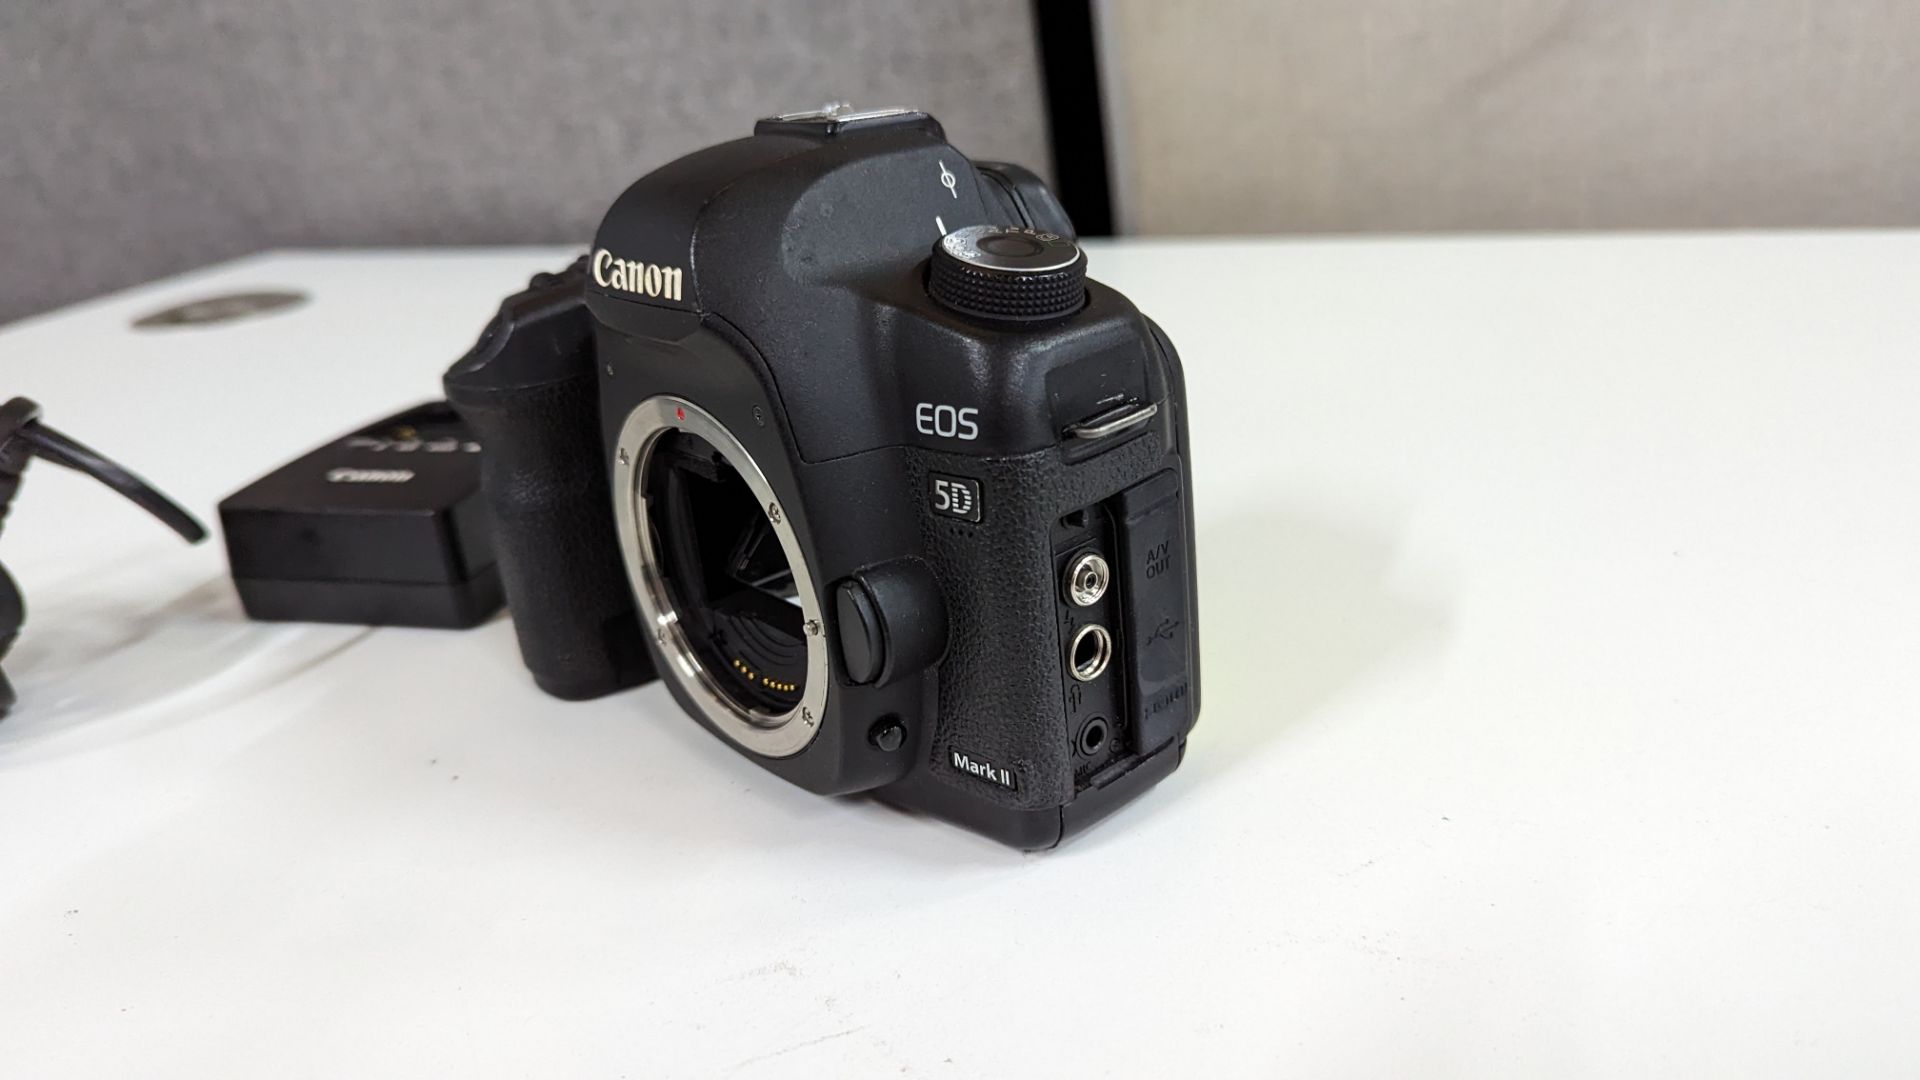 Canon EOS 5D Mark II digital camera plus Canon battery charger. N.B. no lens or battery included wi - Image 6 of 11